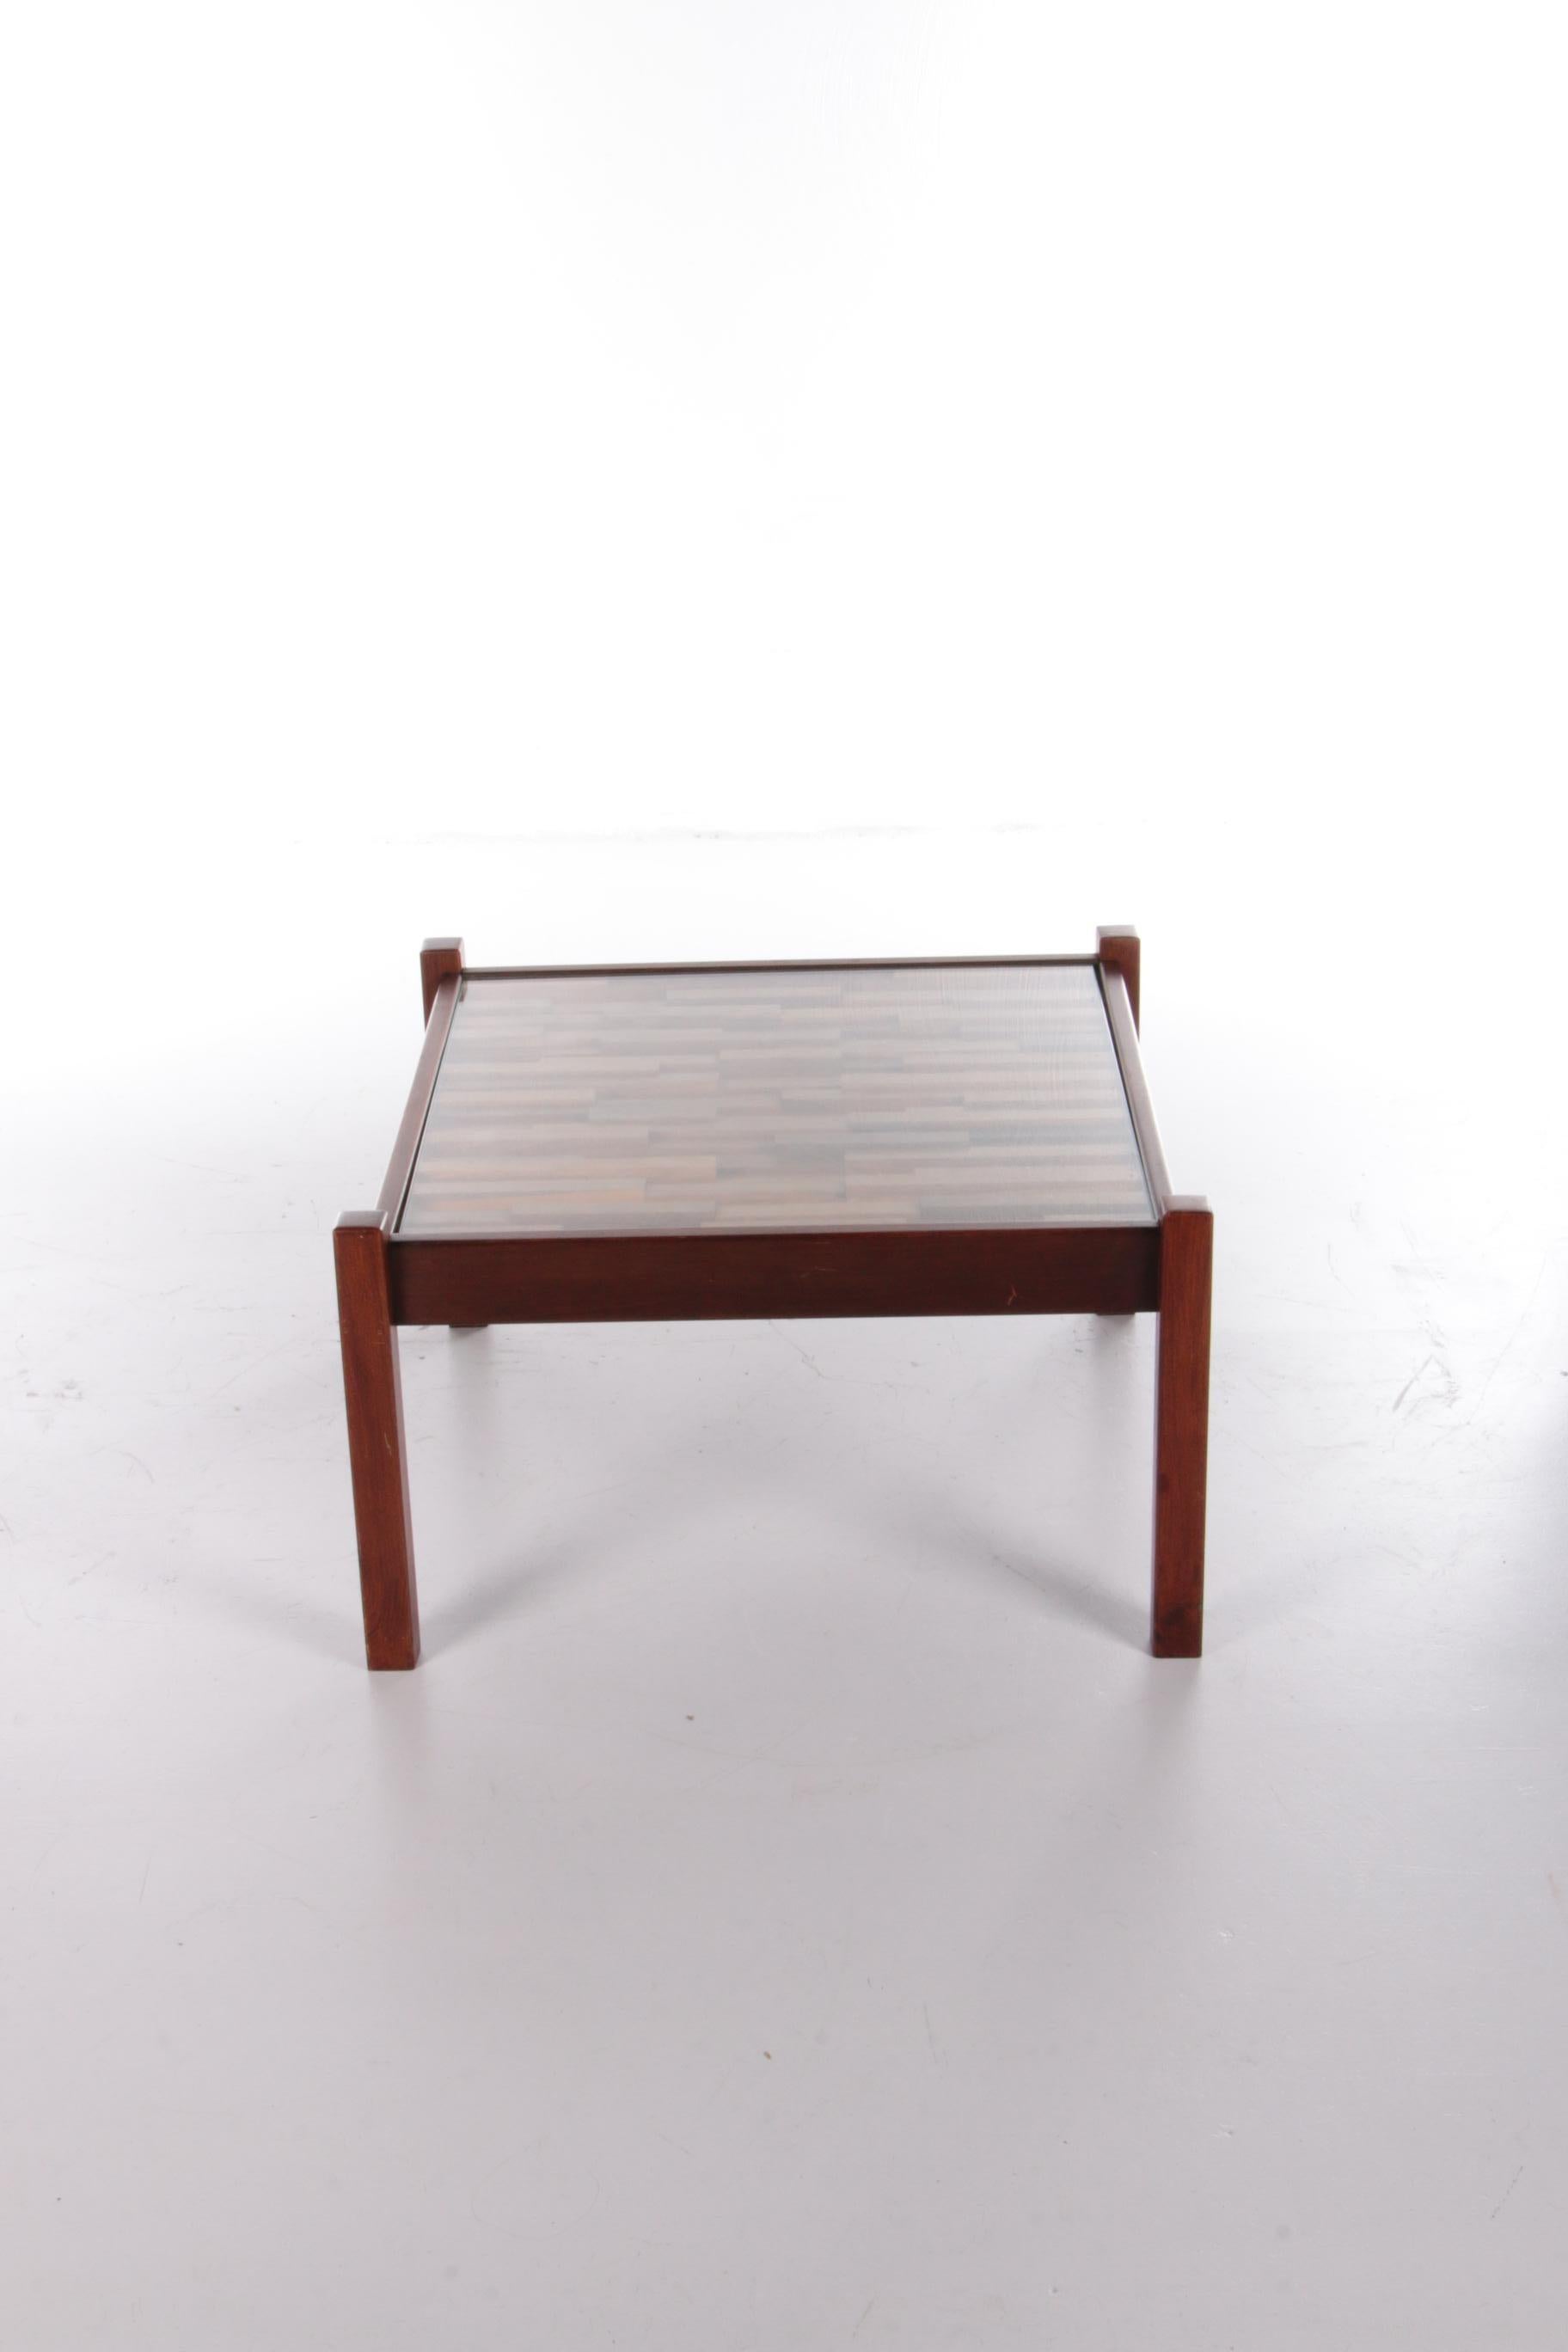 Mid-20th Century Brazilian Coffee Table Design by Percival Lafer, 1960s For Sale